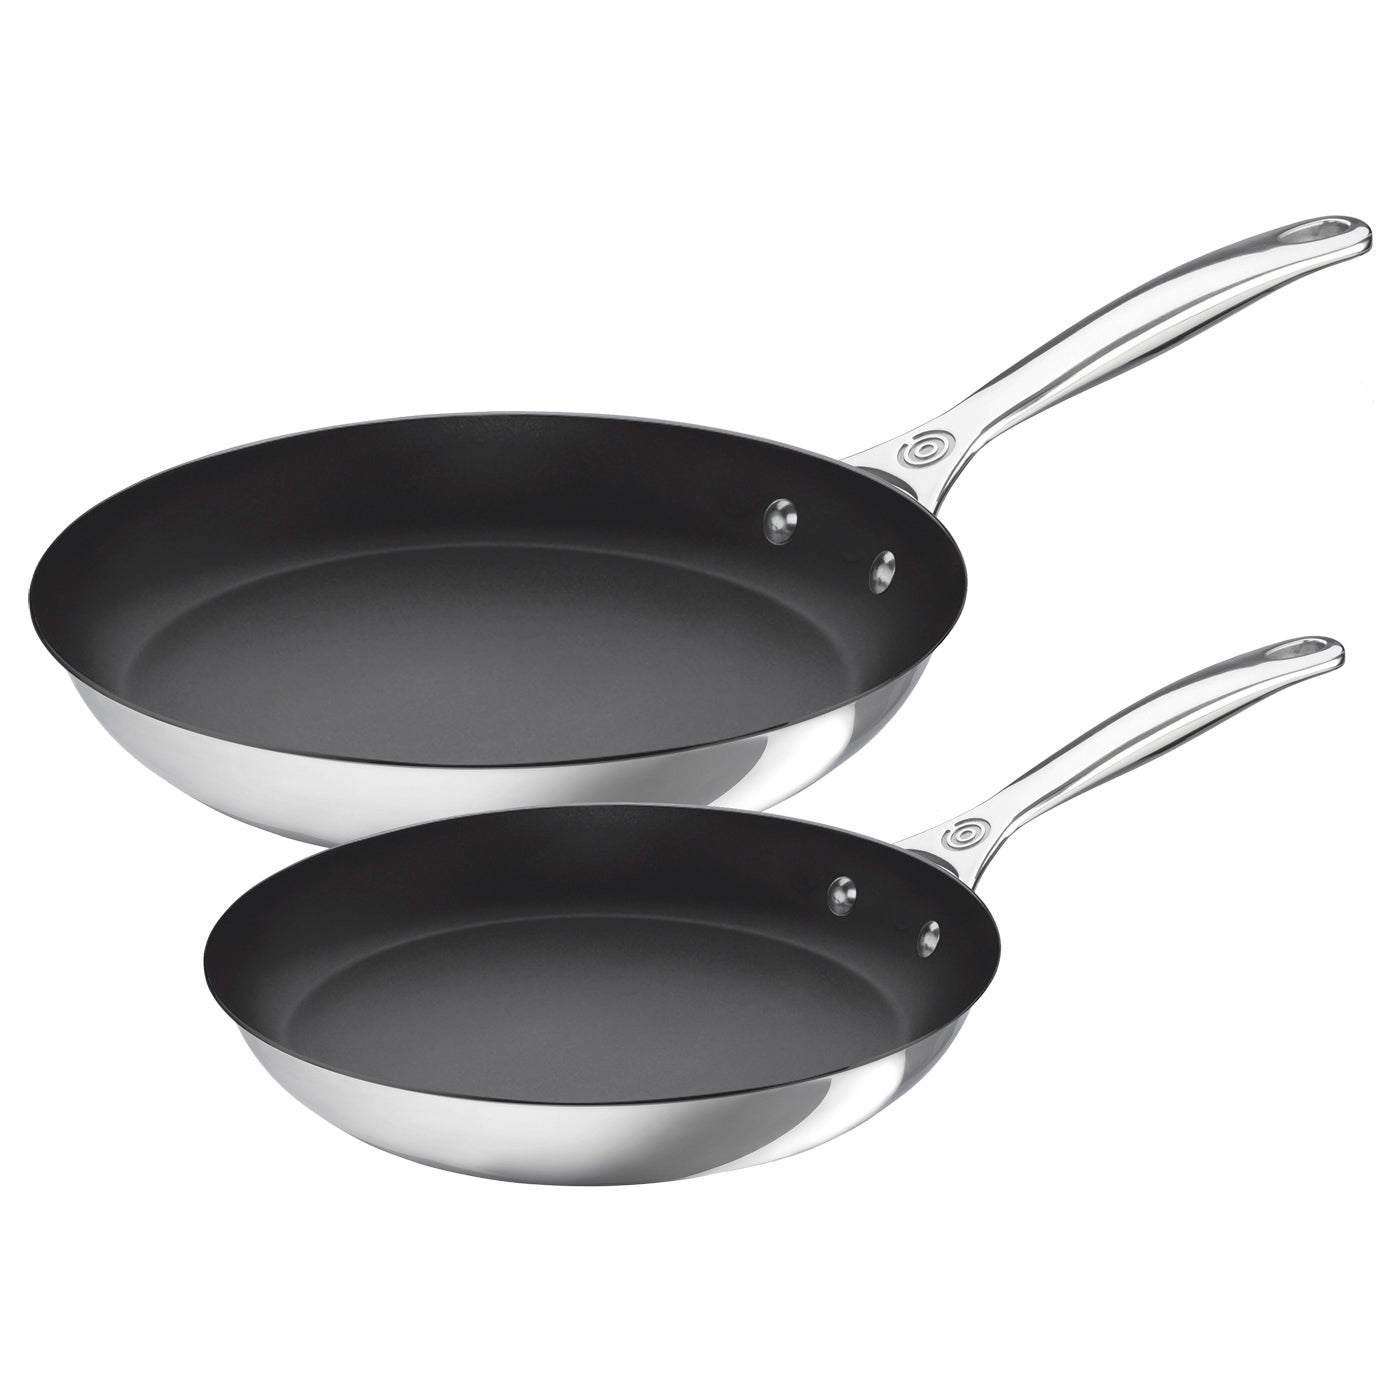 https://www.chefsarsenal.com/cdn/shop/products/le-creuset-2-piece-nonstick-fry-pan-set-stainless-steel-ssp14102_fe880d92-6c59-4a90-bb55-16a56fa8bac0_1400x.jpg?v=1569206409